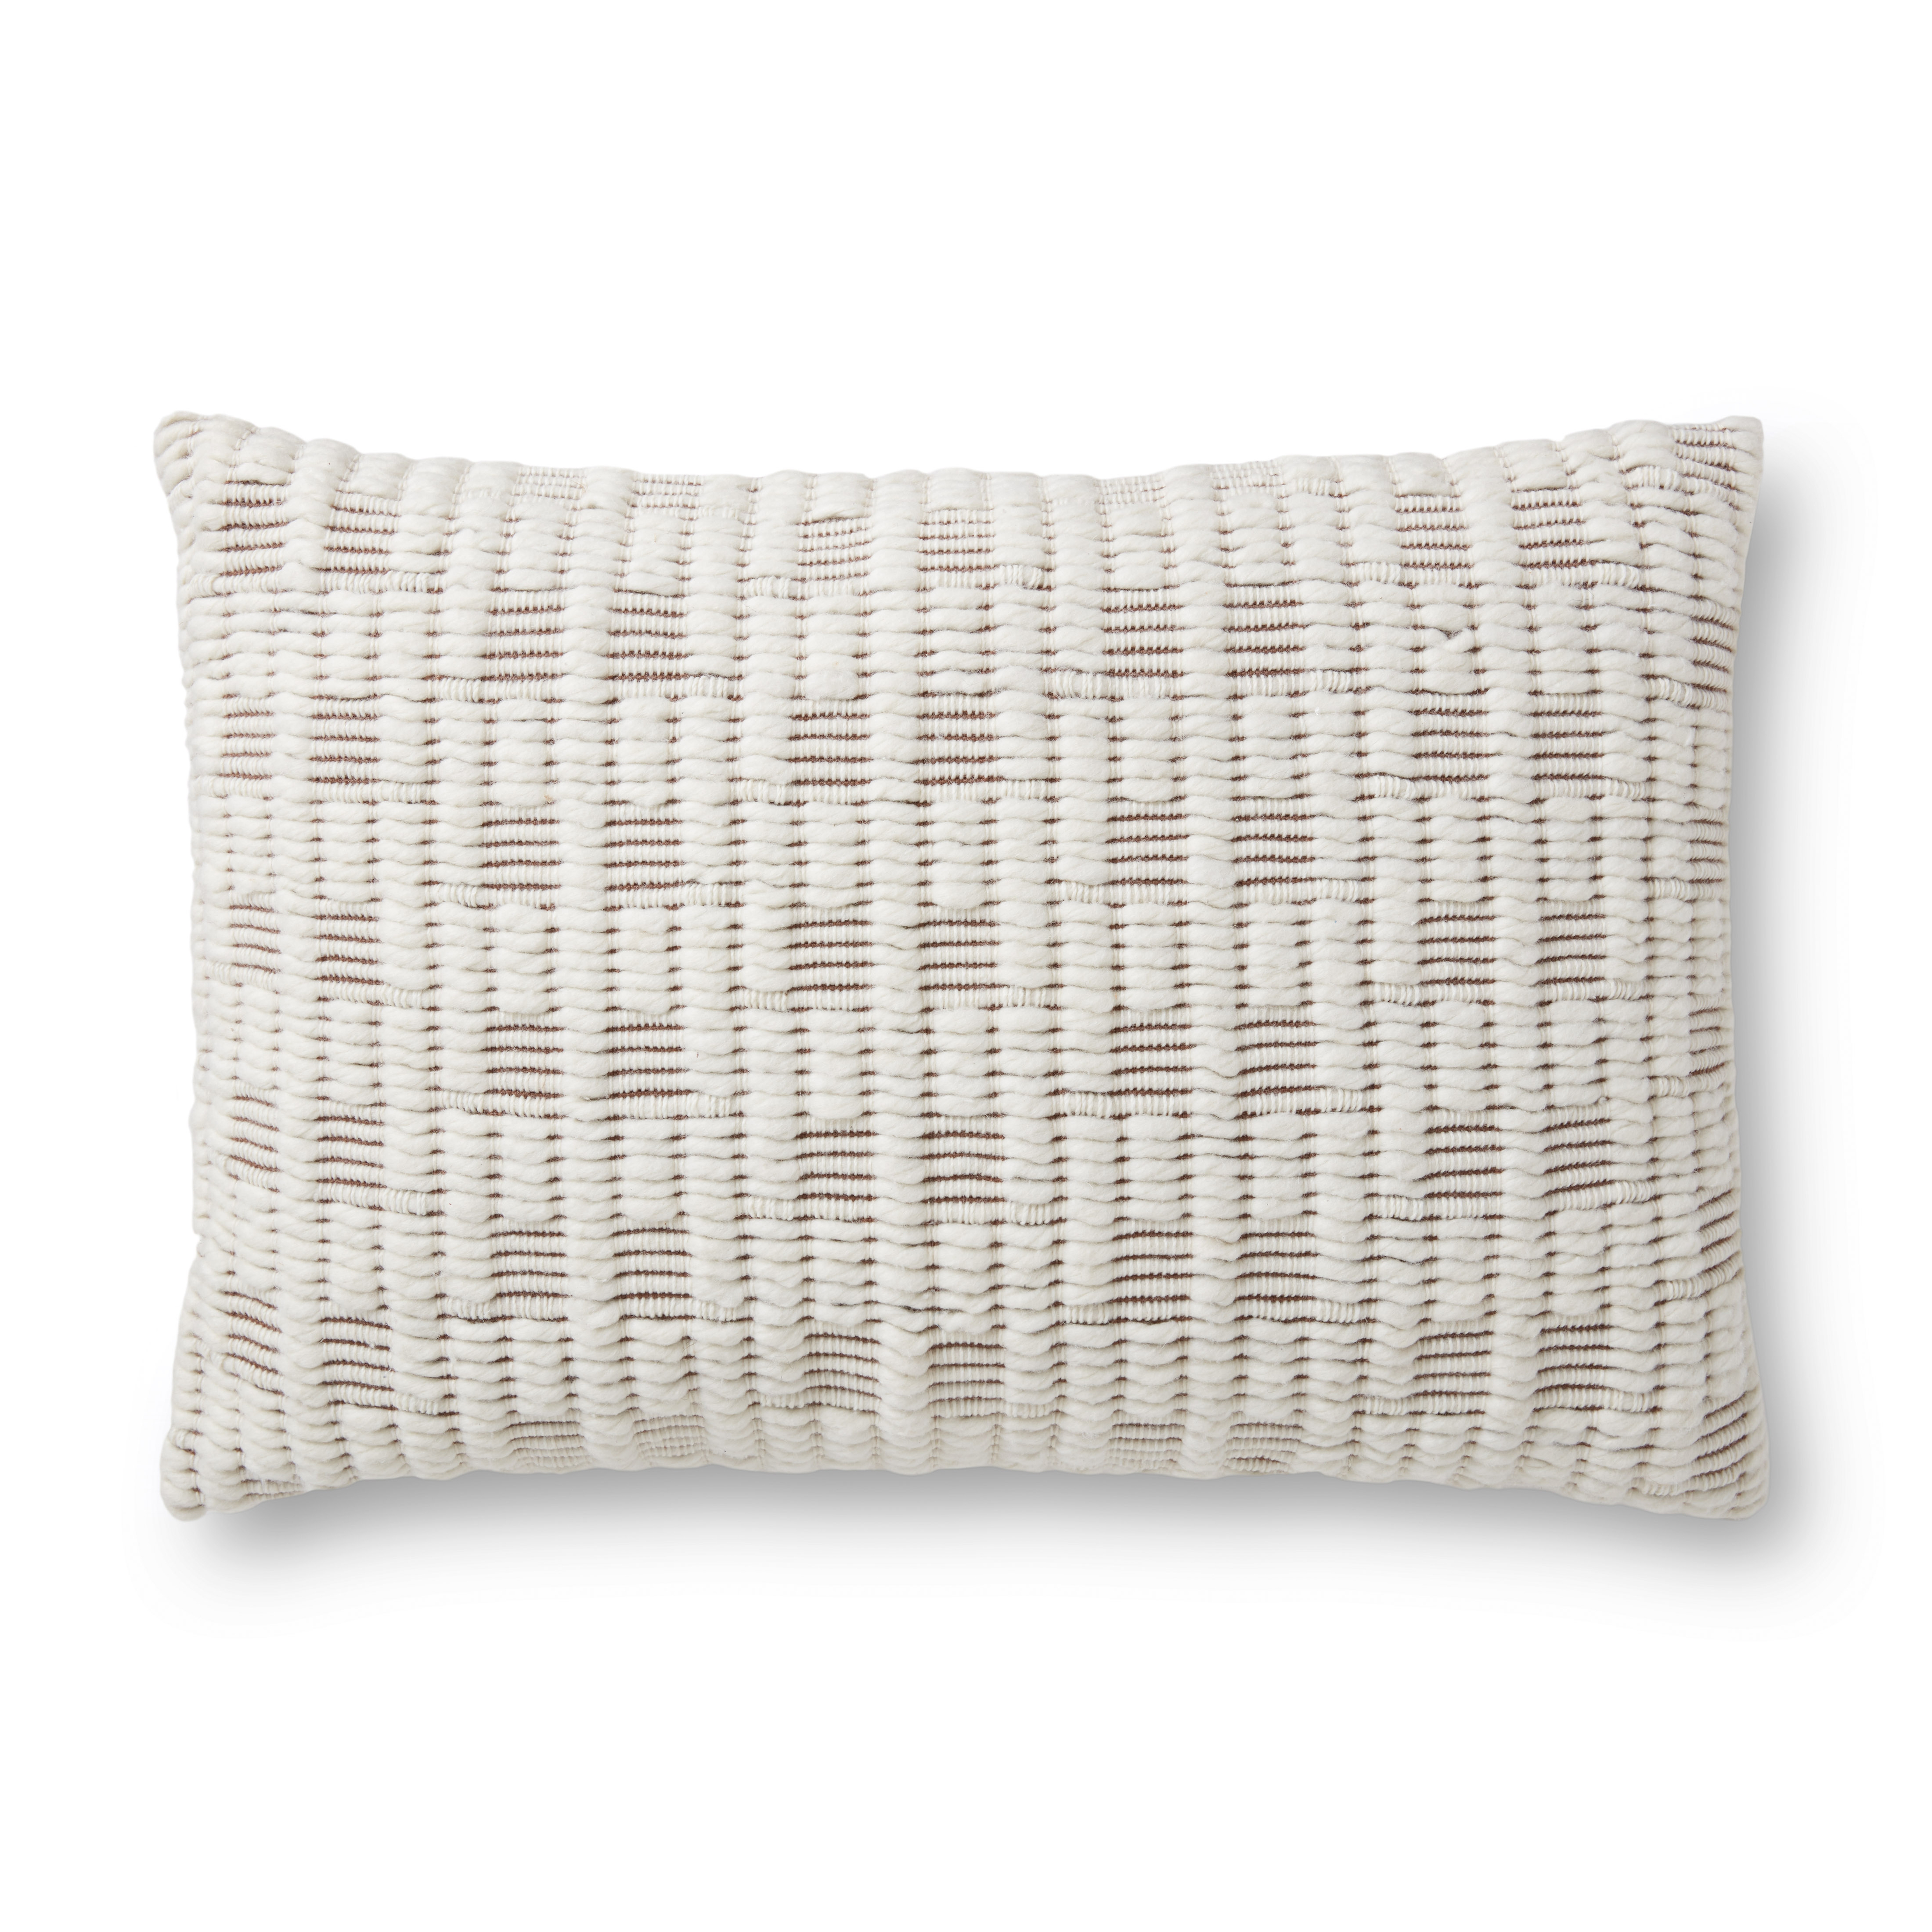 PILLOWS PMH0012 IVORY / COFFEE 16" x 26" Cover Only - Magnolia Home by Joana Gaines Crafted by Loloi Rugs